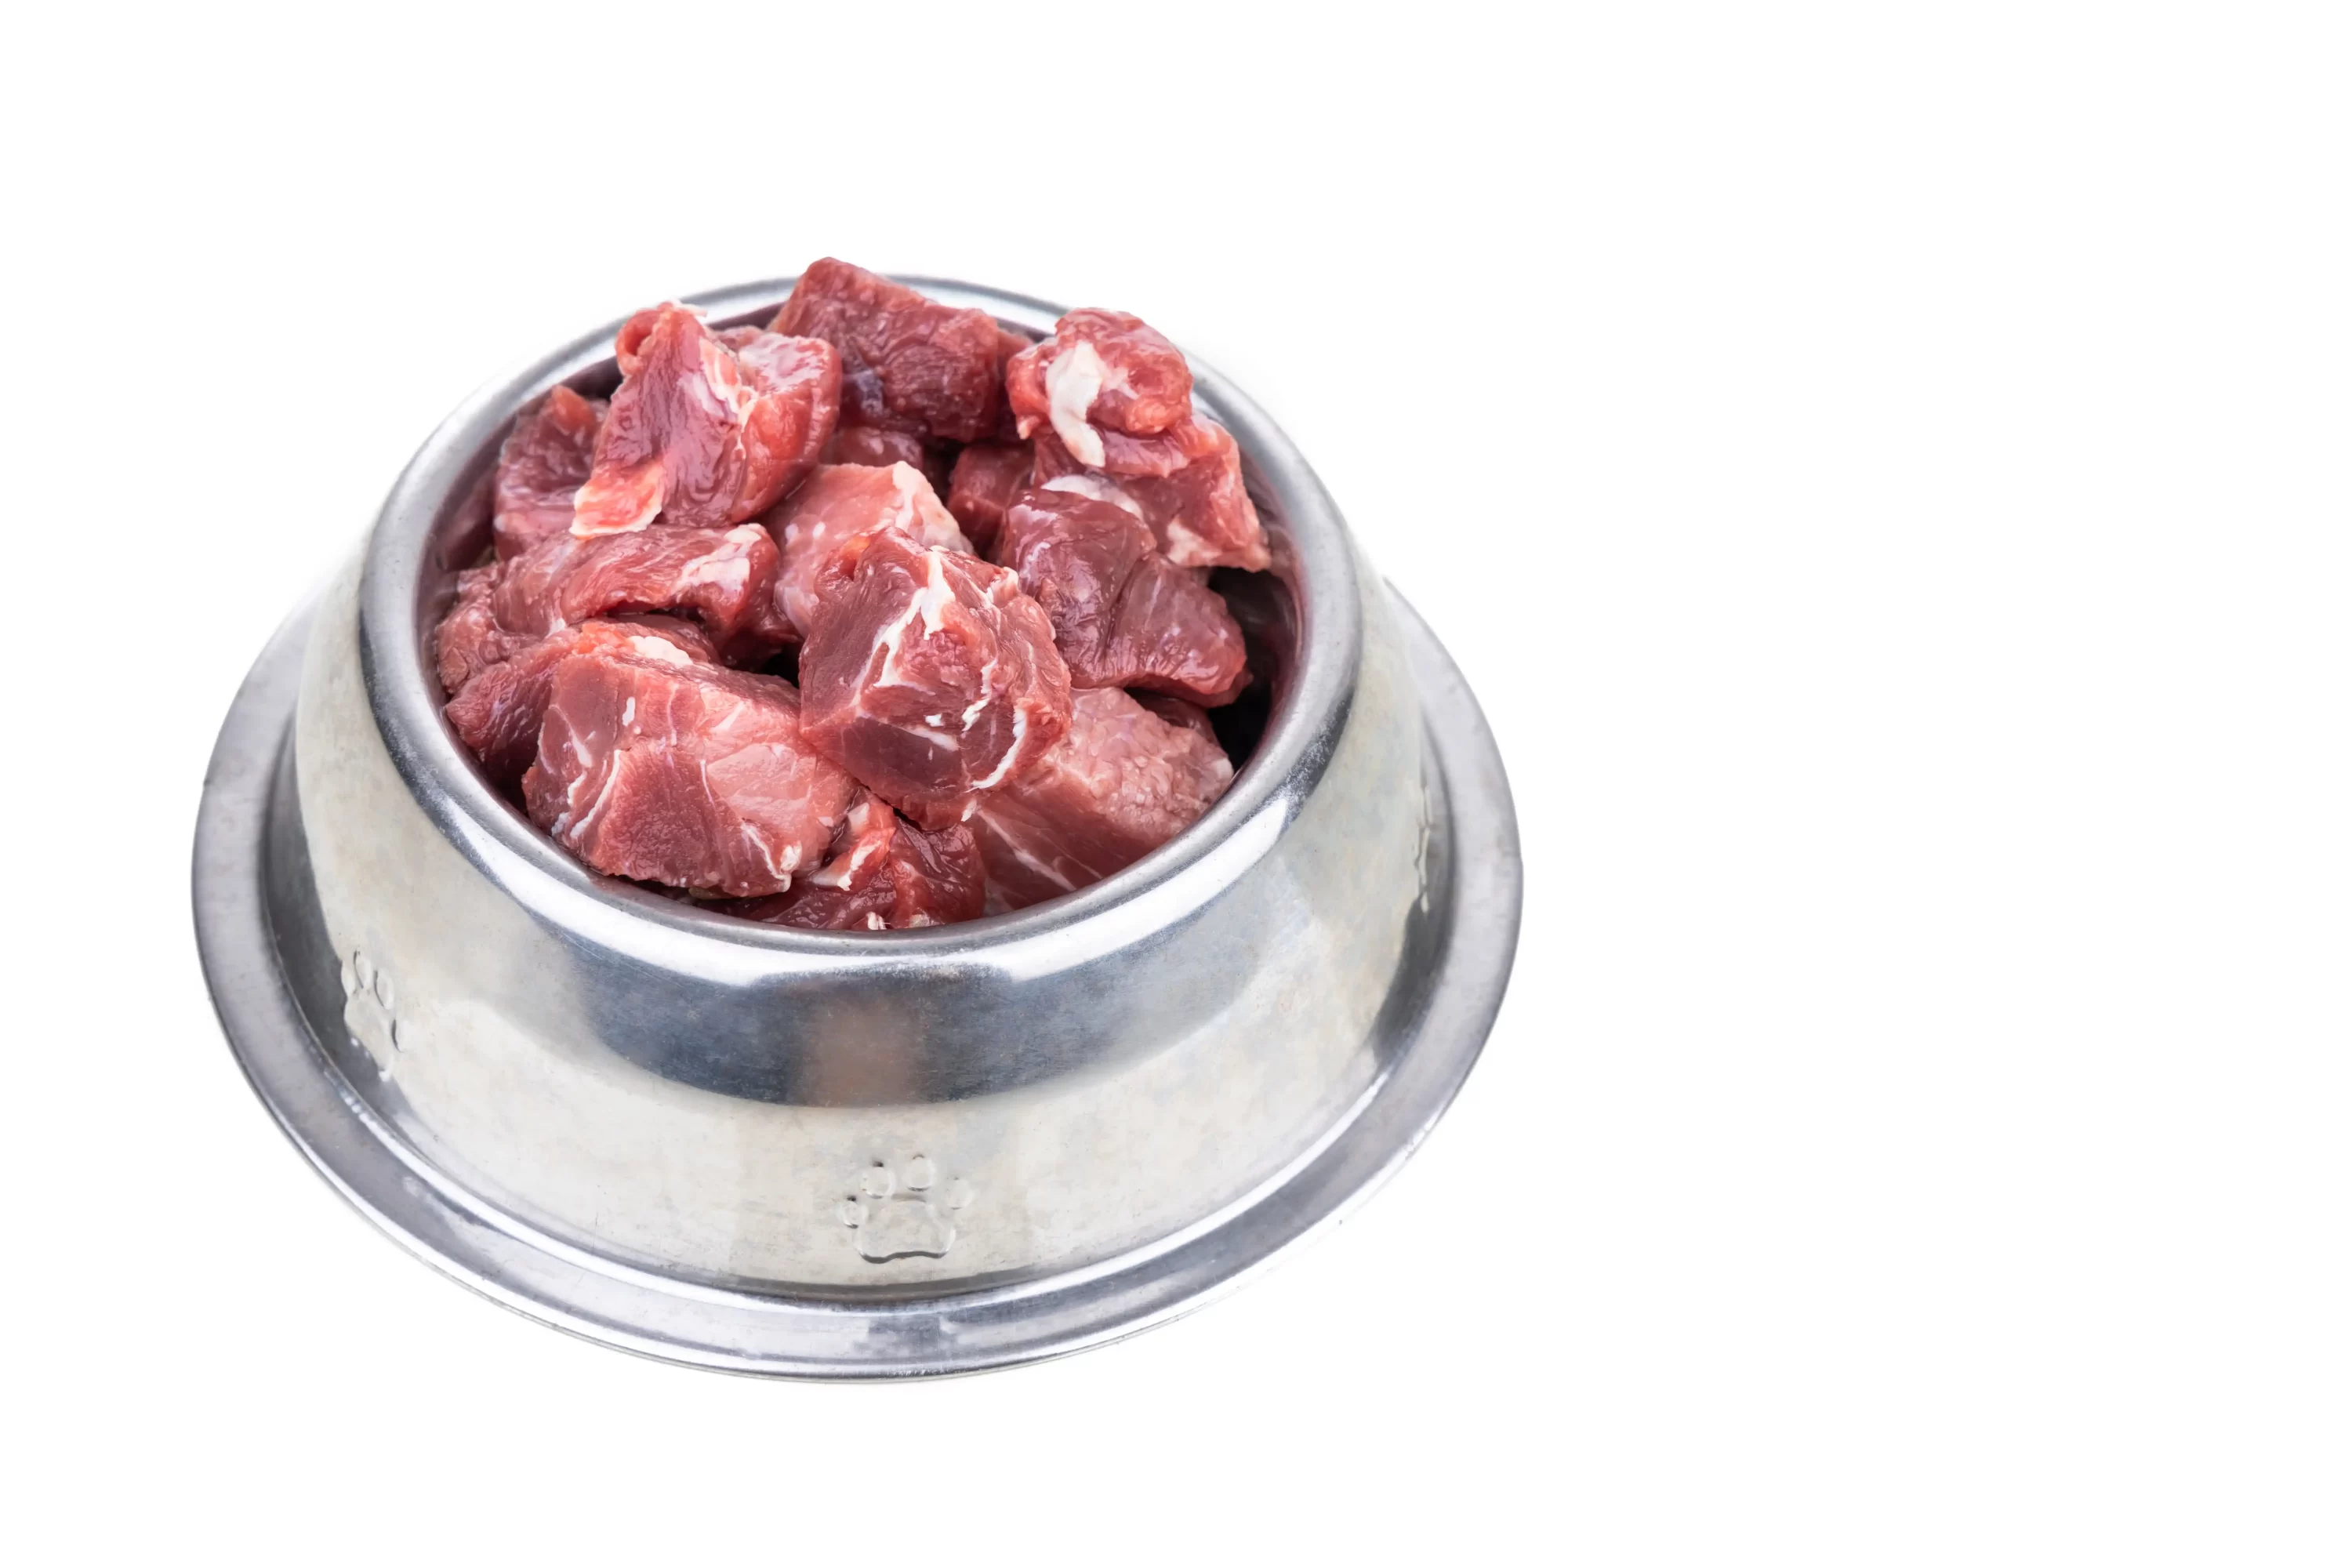 Chunks of lean meat in a dog bowl. Human food dogs cat eat. Pets24